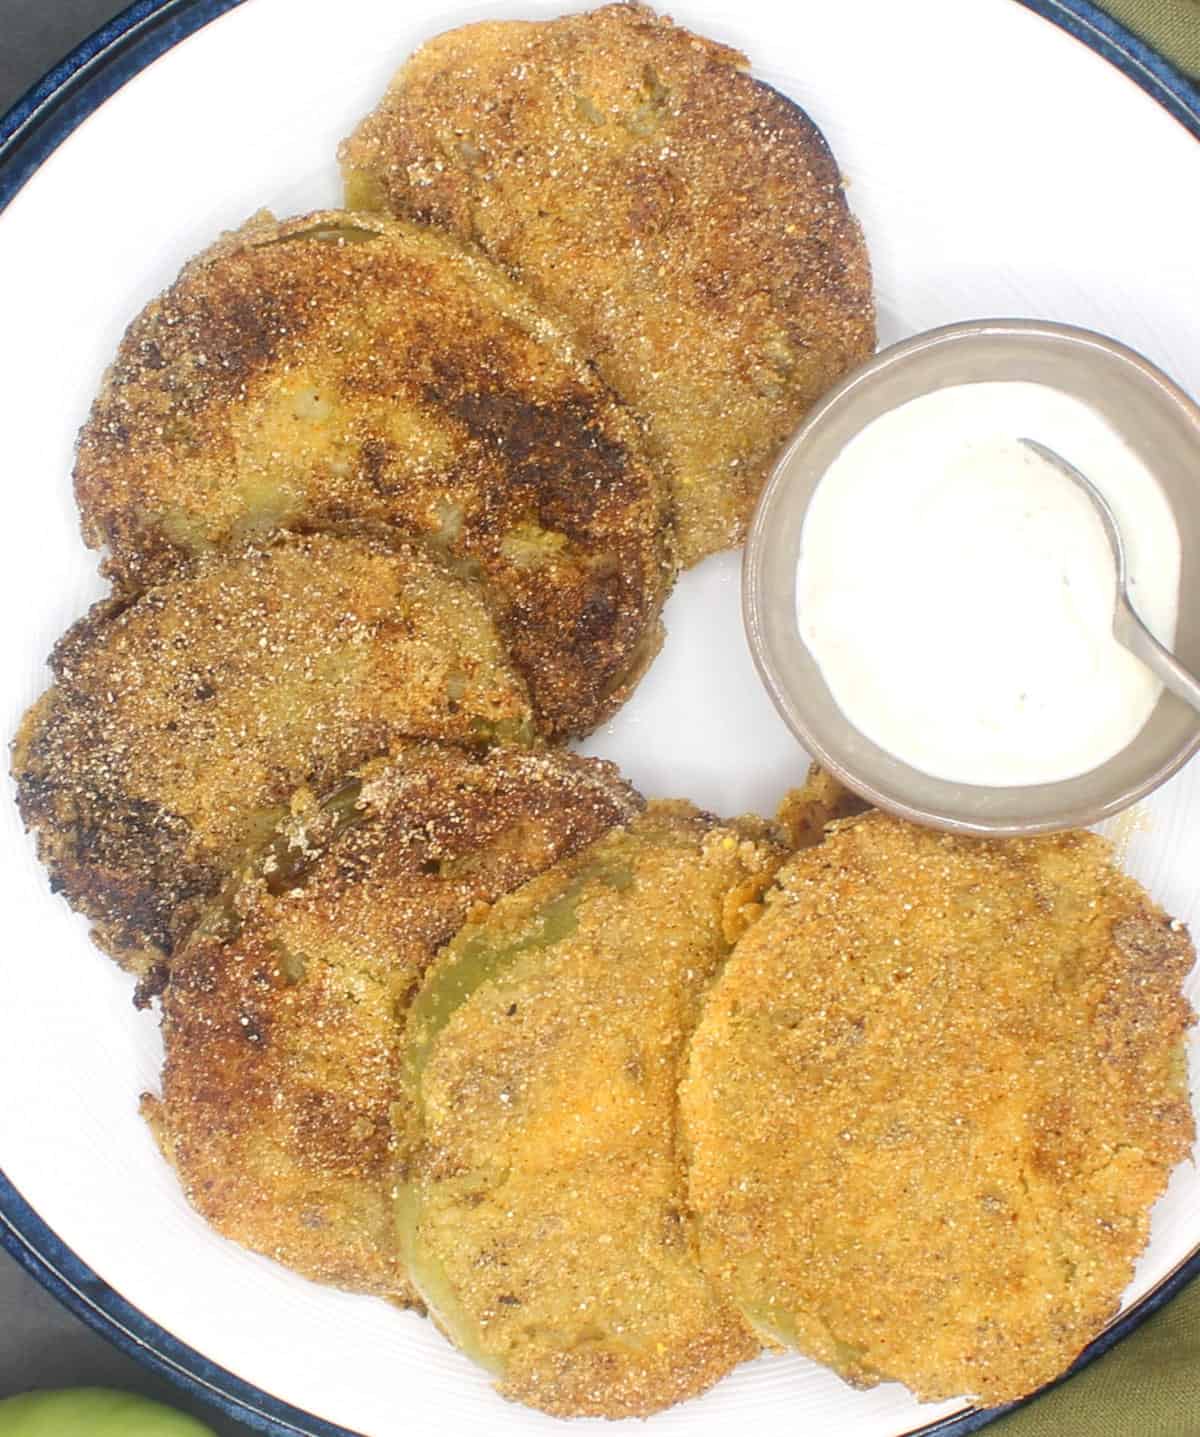 Slices of vegan fried green tomatoes on white plate with spicy mayo in small bowl.